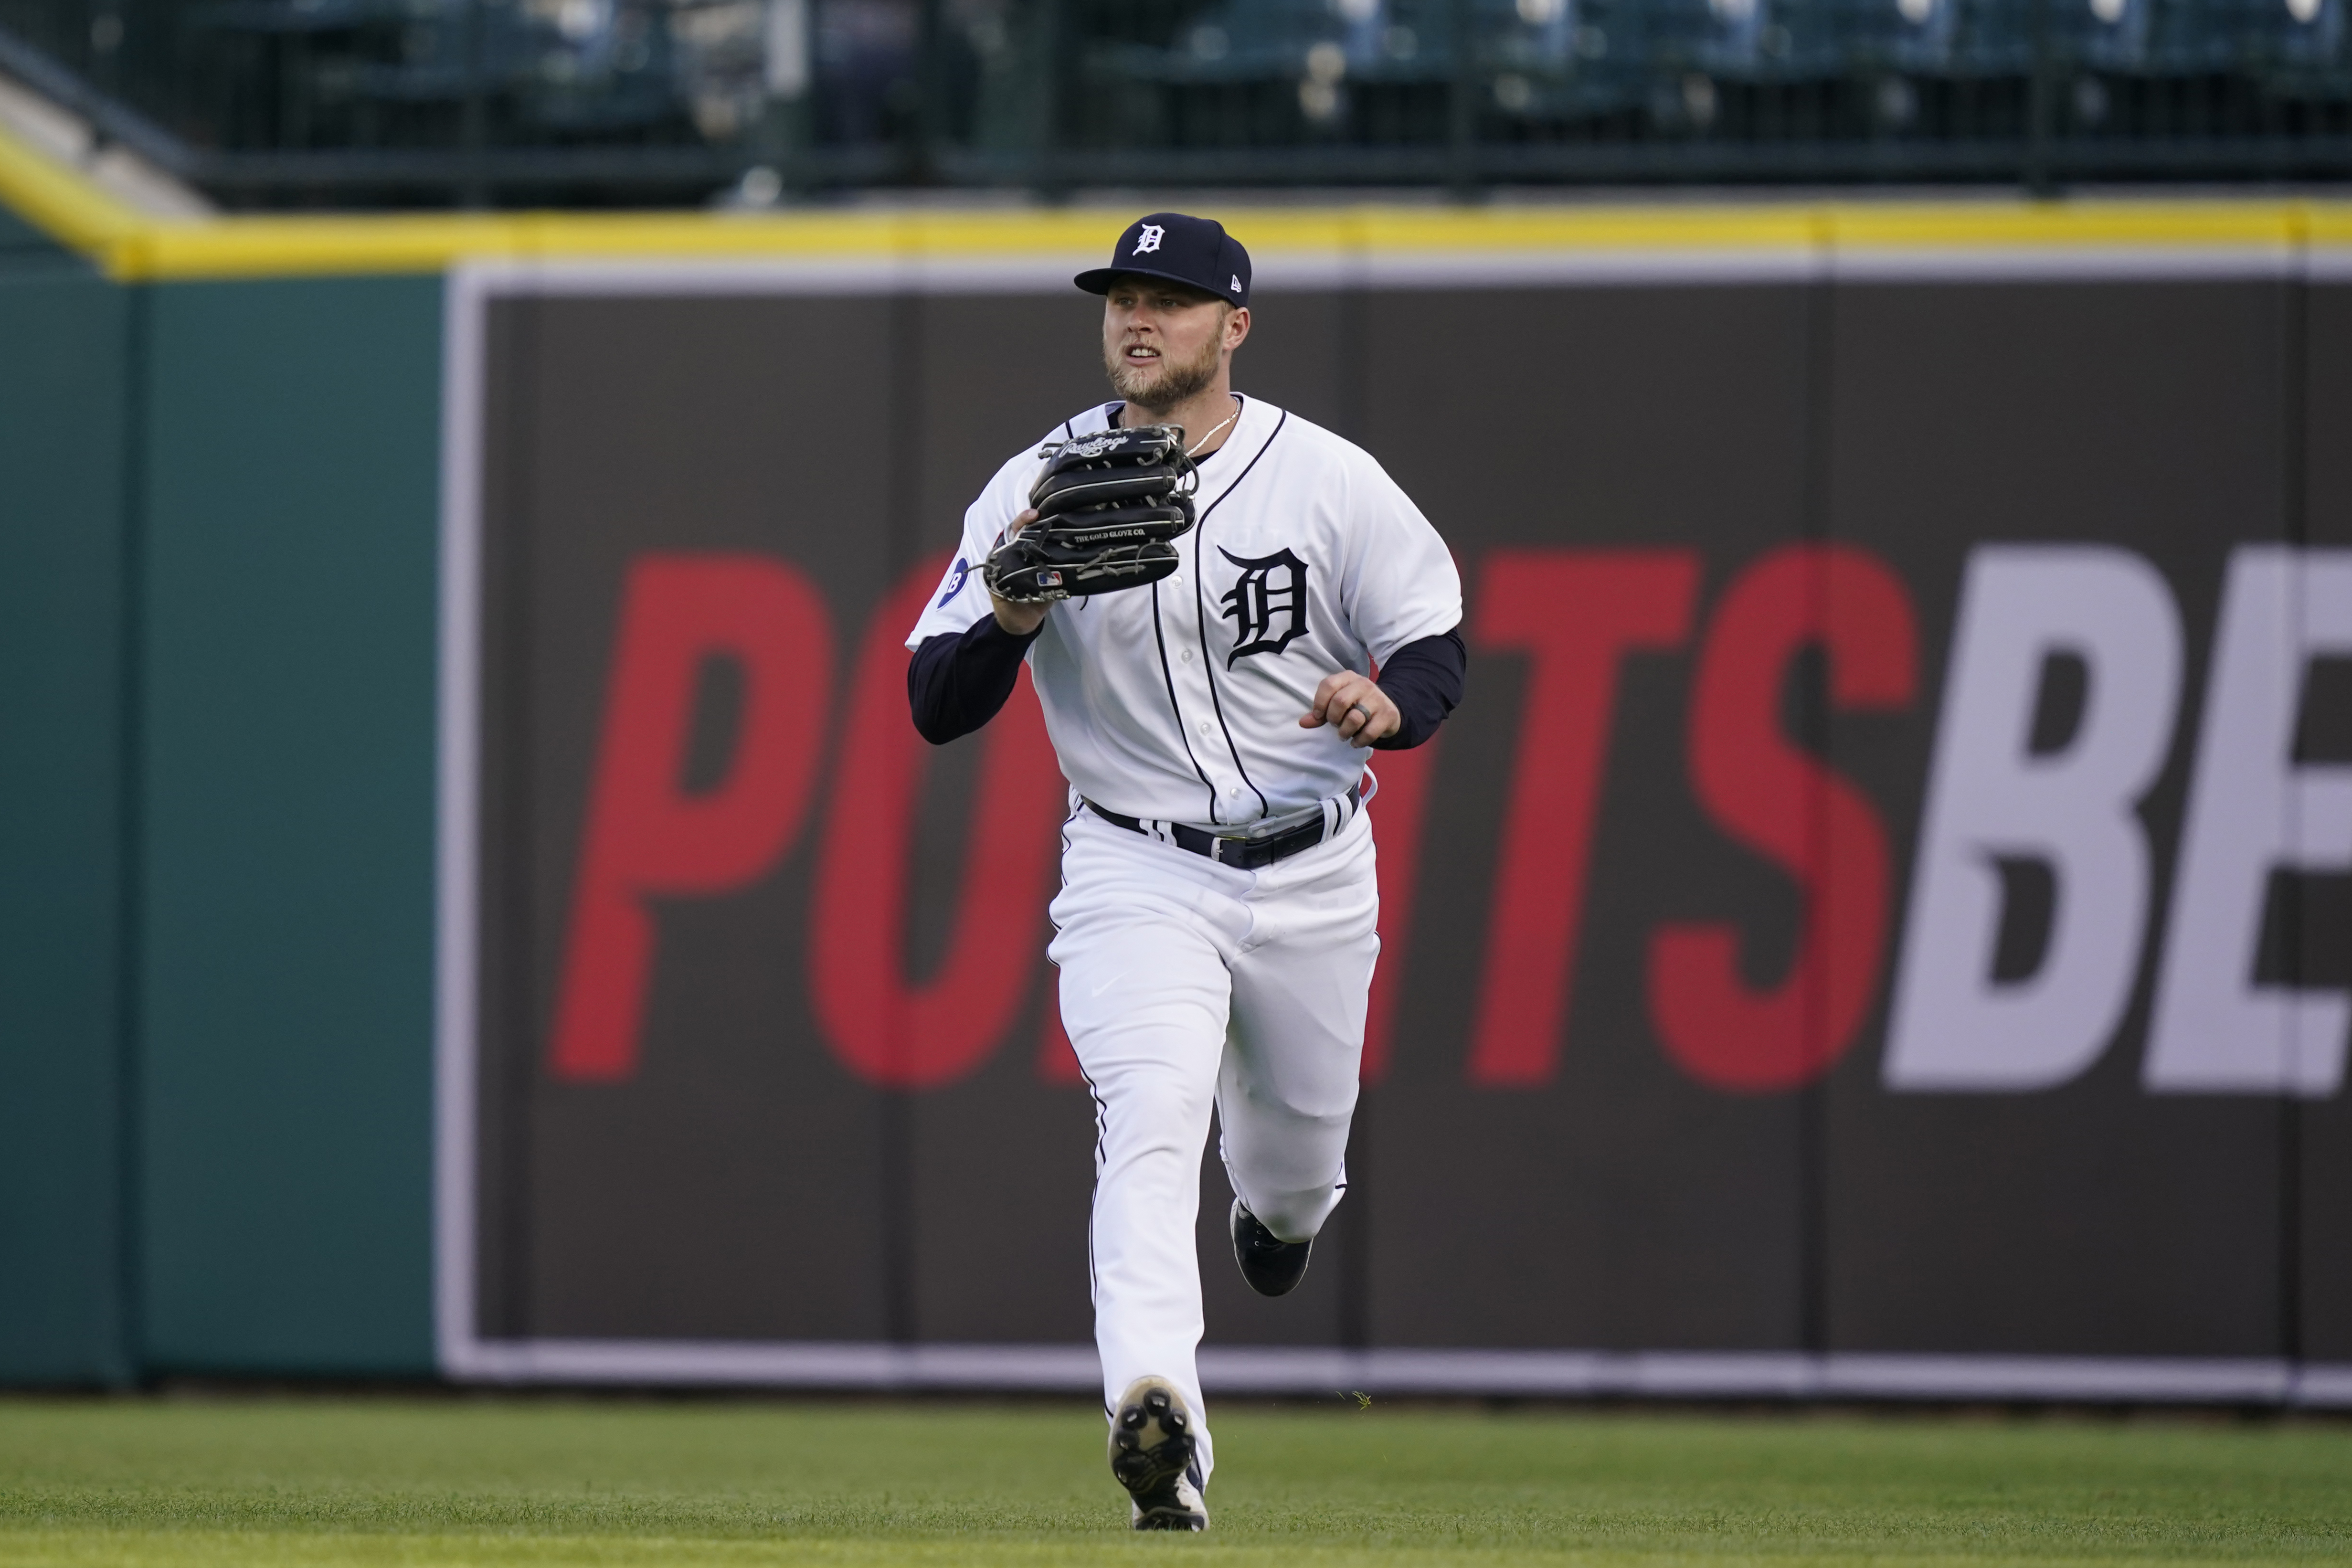 Tigers will check in with Austin Meadows soon to determine next